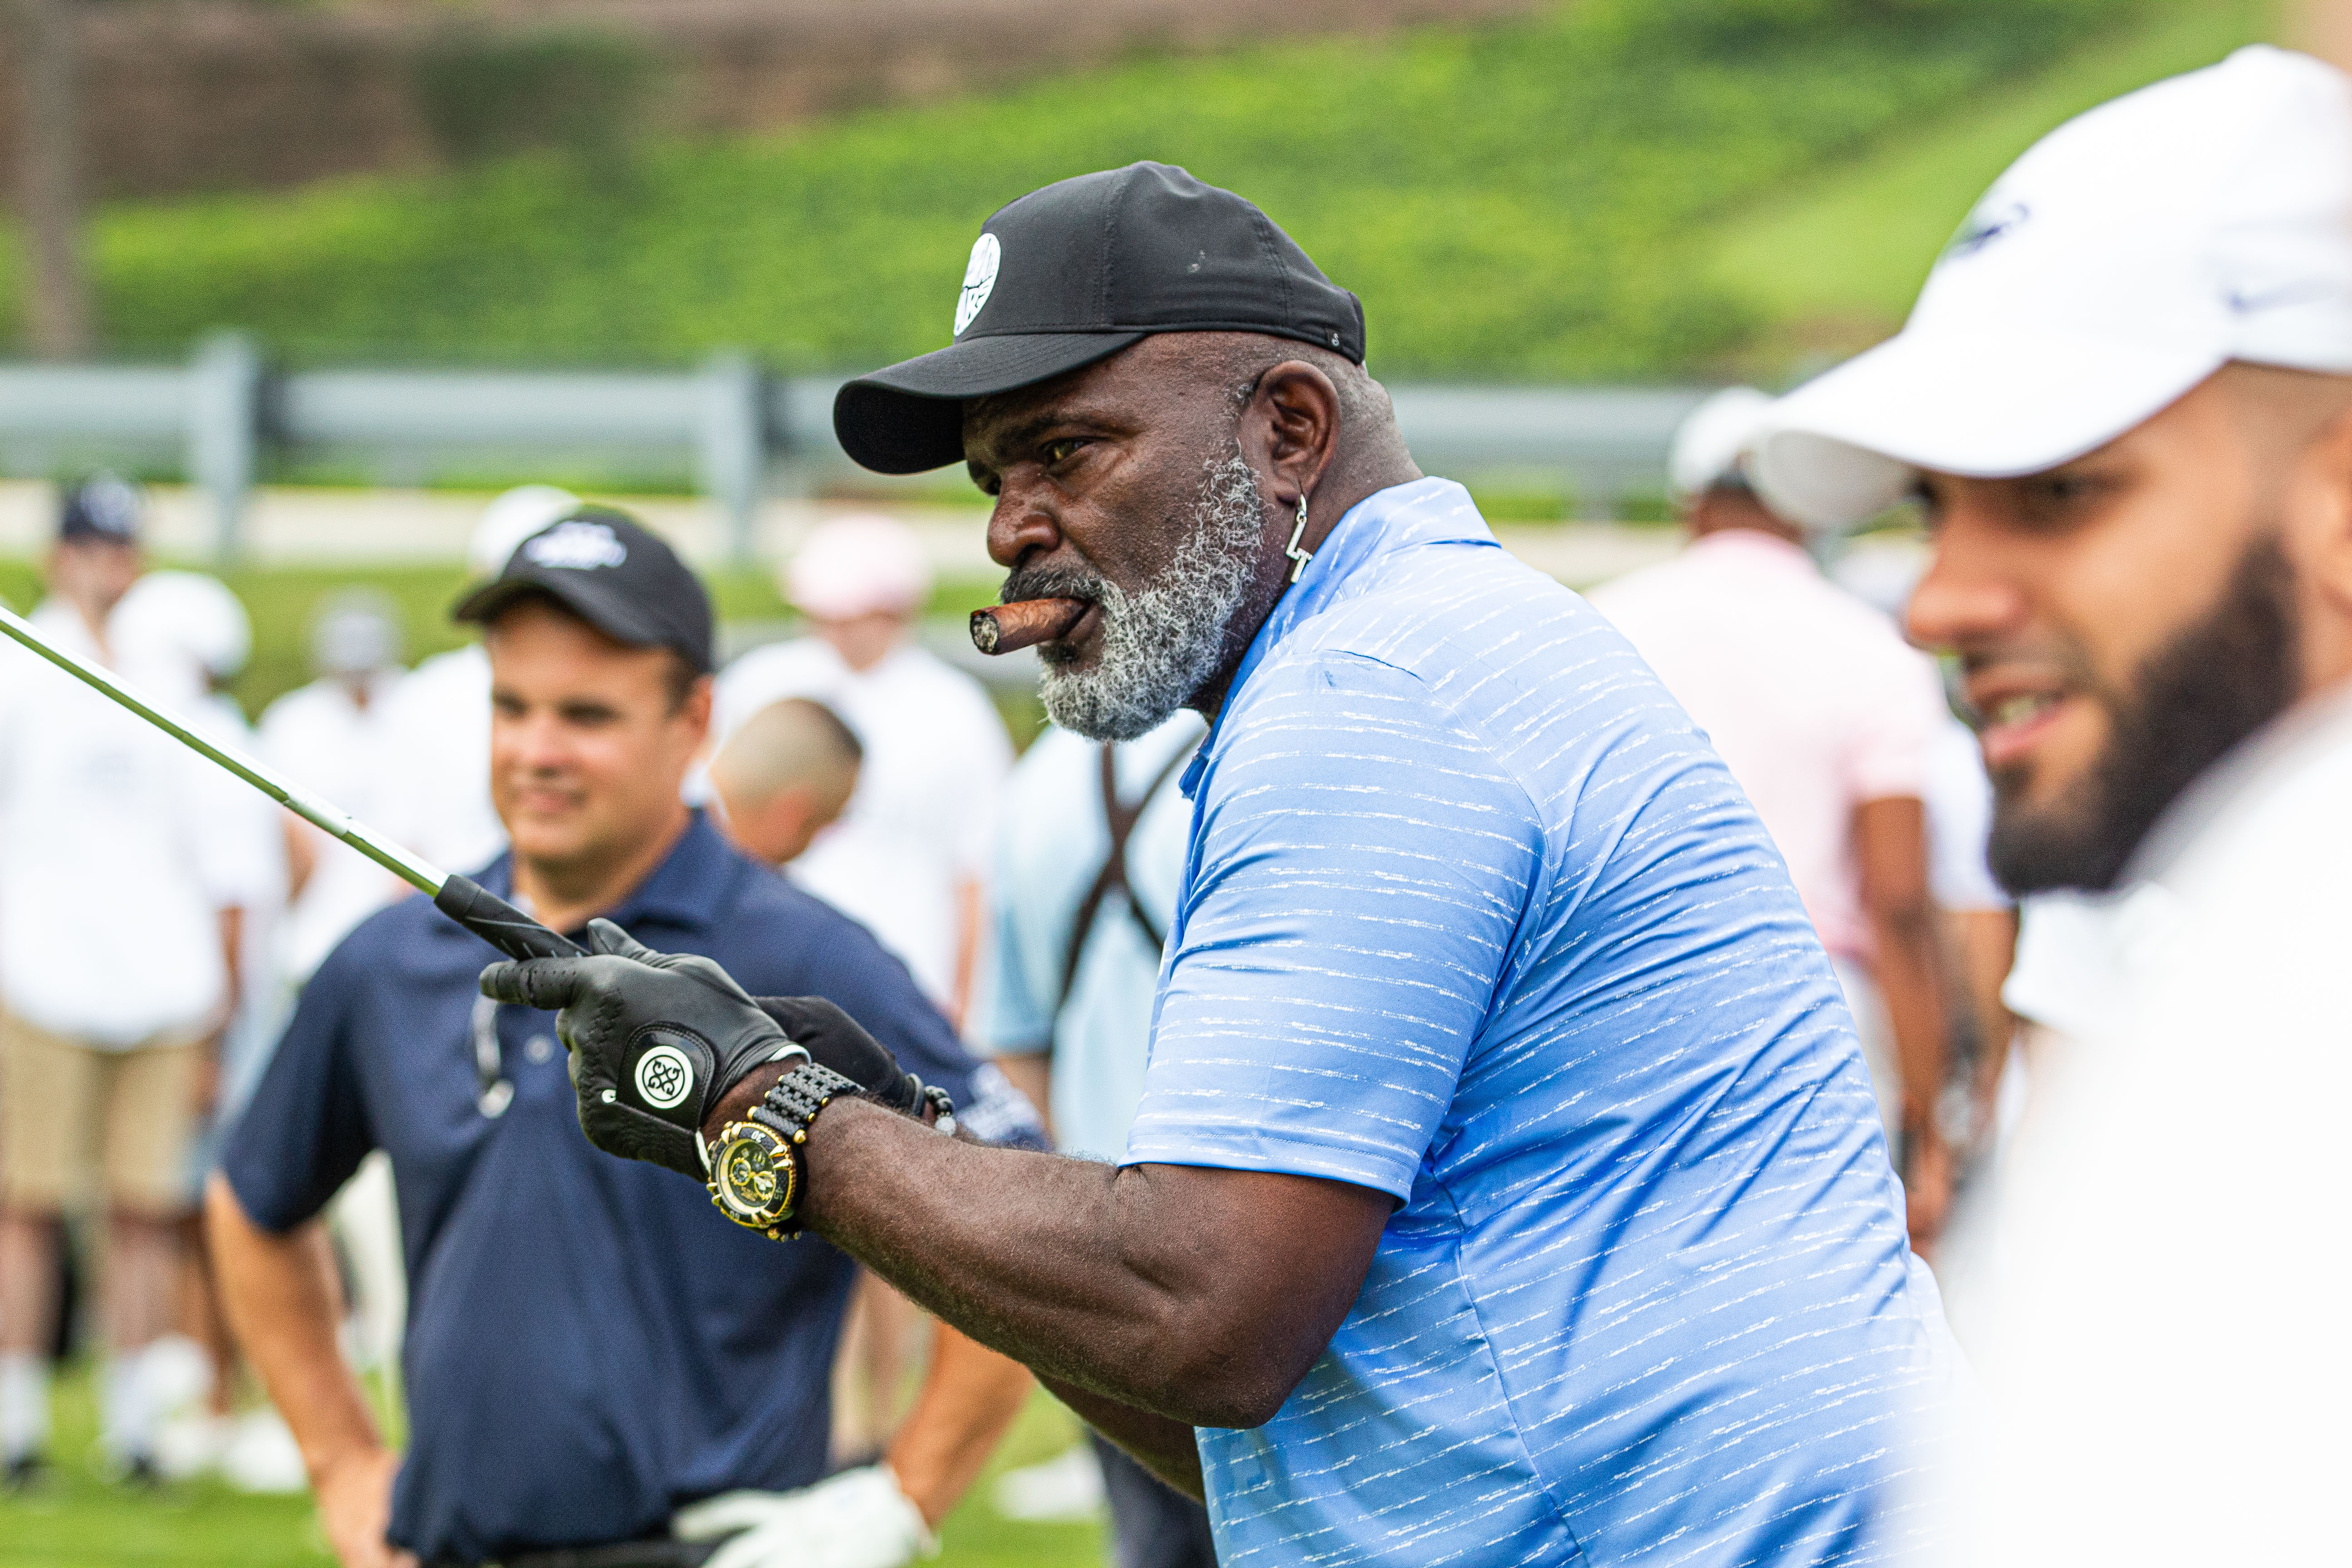 NFL legend Lawrence Taylor lists top 5 defensive players of all